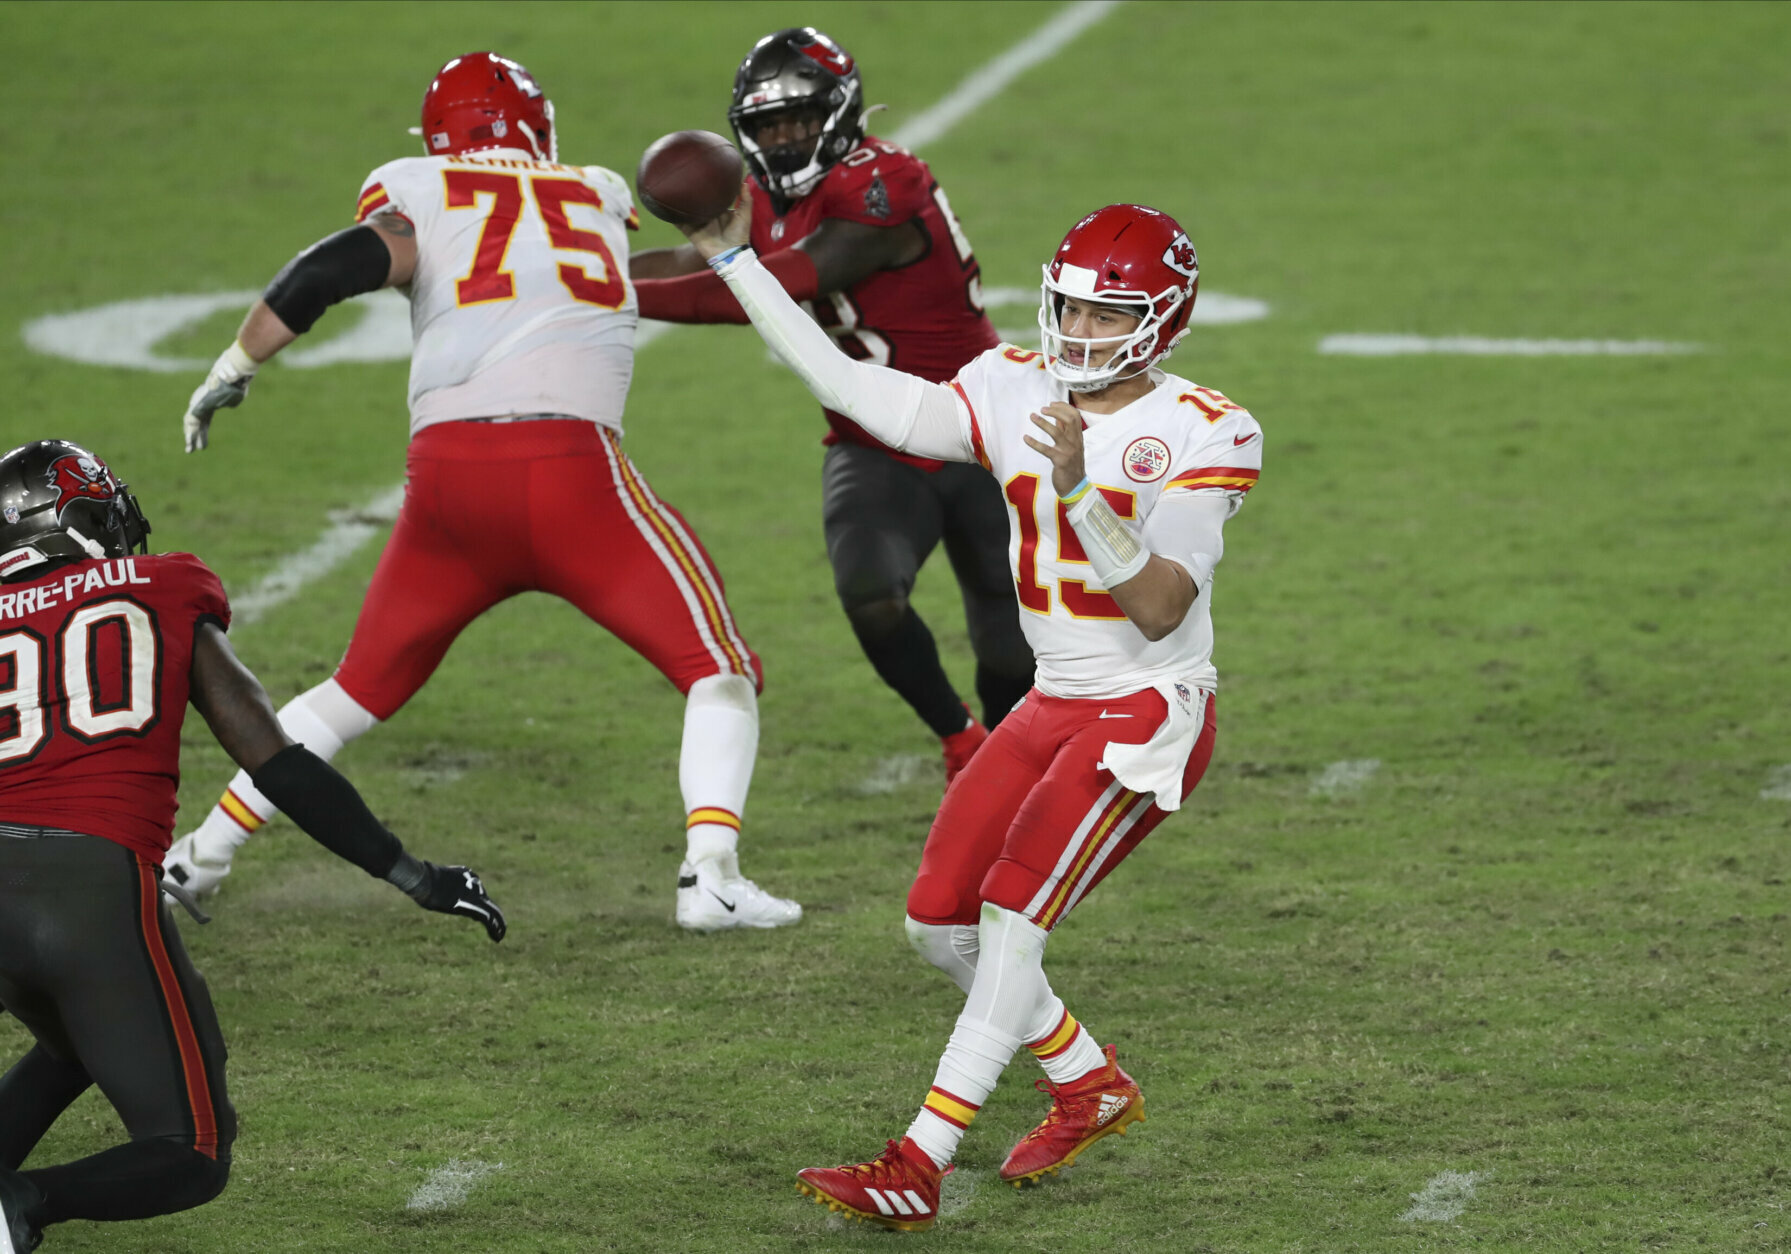 <p><b>Chiefs 27</b><br />
<b>Bucs 24</b></p>
<p>This was everything you&#8217;d want from a game pitting Patrick Mahomes against Tom Brady: almost 800 passing yards, six passing touchdowns and only three points separating the two teams at the end. Playoff ramifications aside, the GOAT really needed this win to get <a href="https://www.joebucsfan.com/2020/11/its-just-a-matter-of-each-and-every-week-if-the-quarterback-plays-well-or-not/" target="_blank" rel="noopener">his coach off his back</a>.</p>
